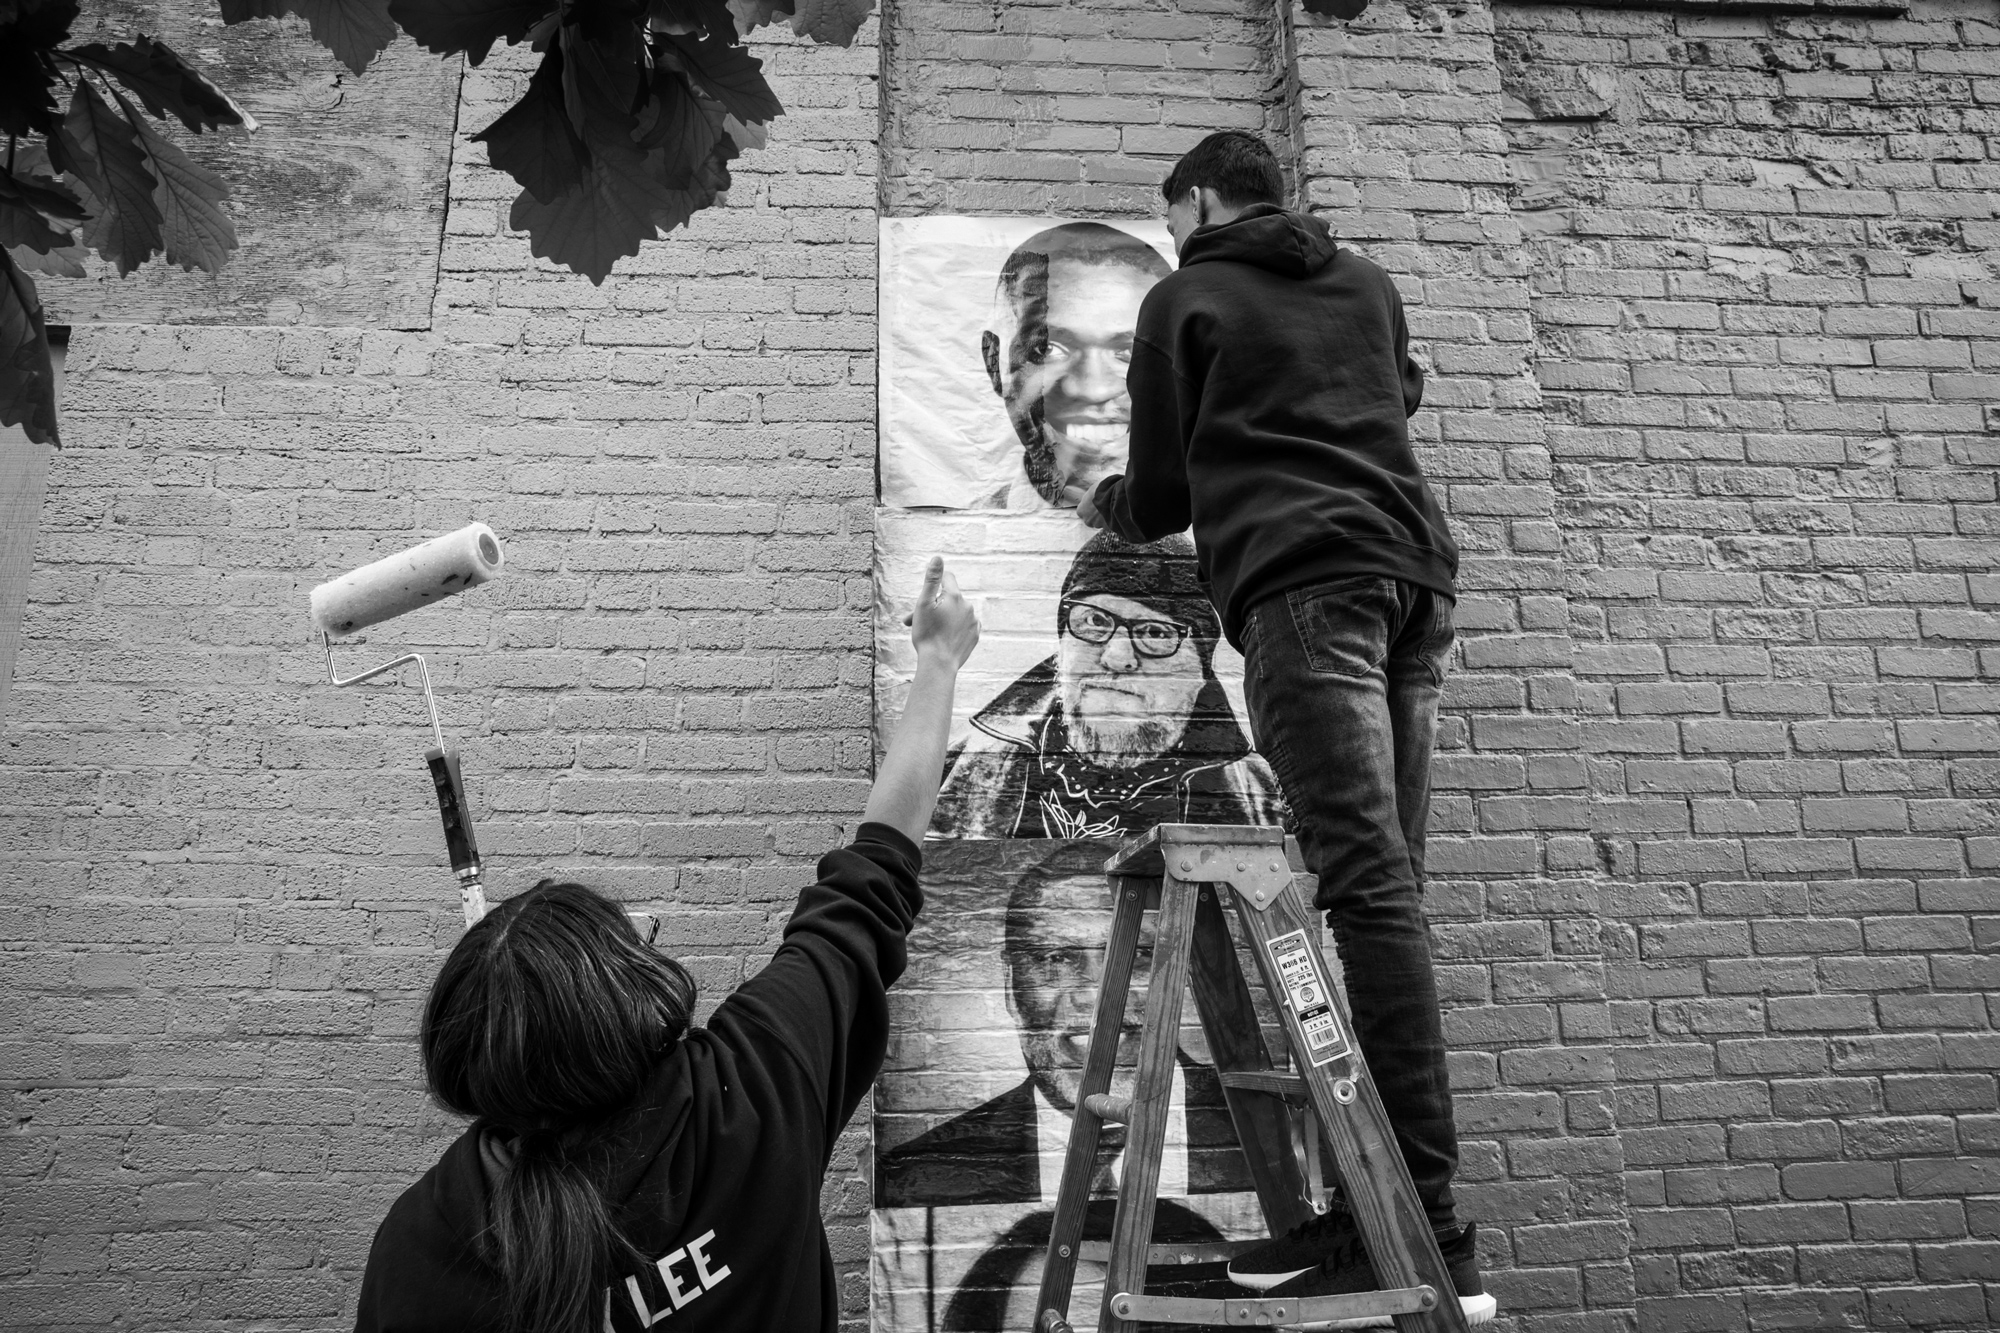 black and white photo of two people hanging people's portraits on the side of a brick building